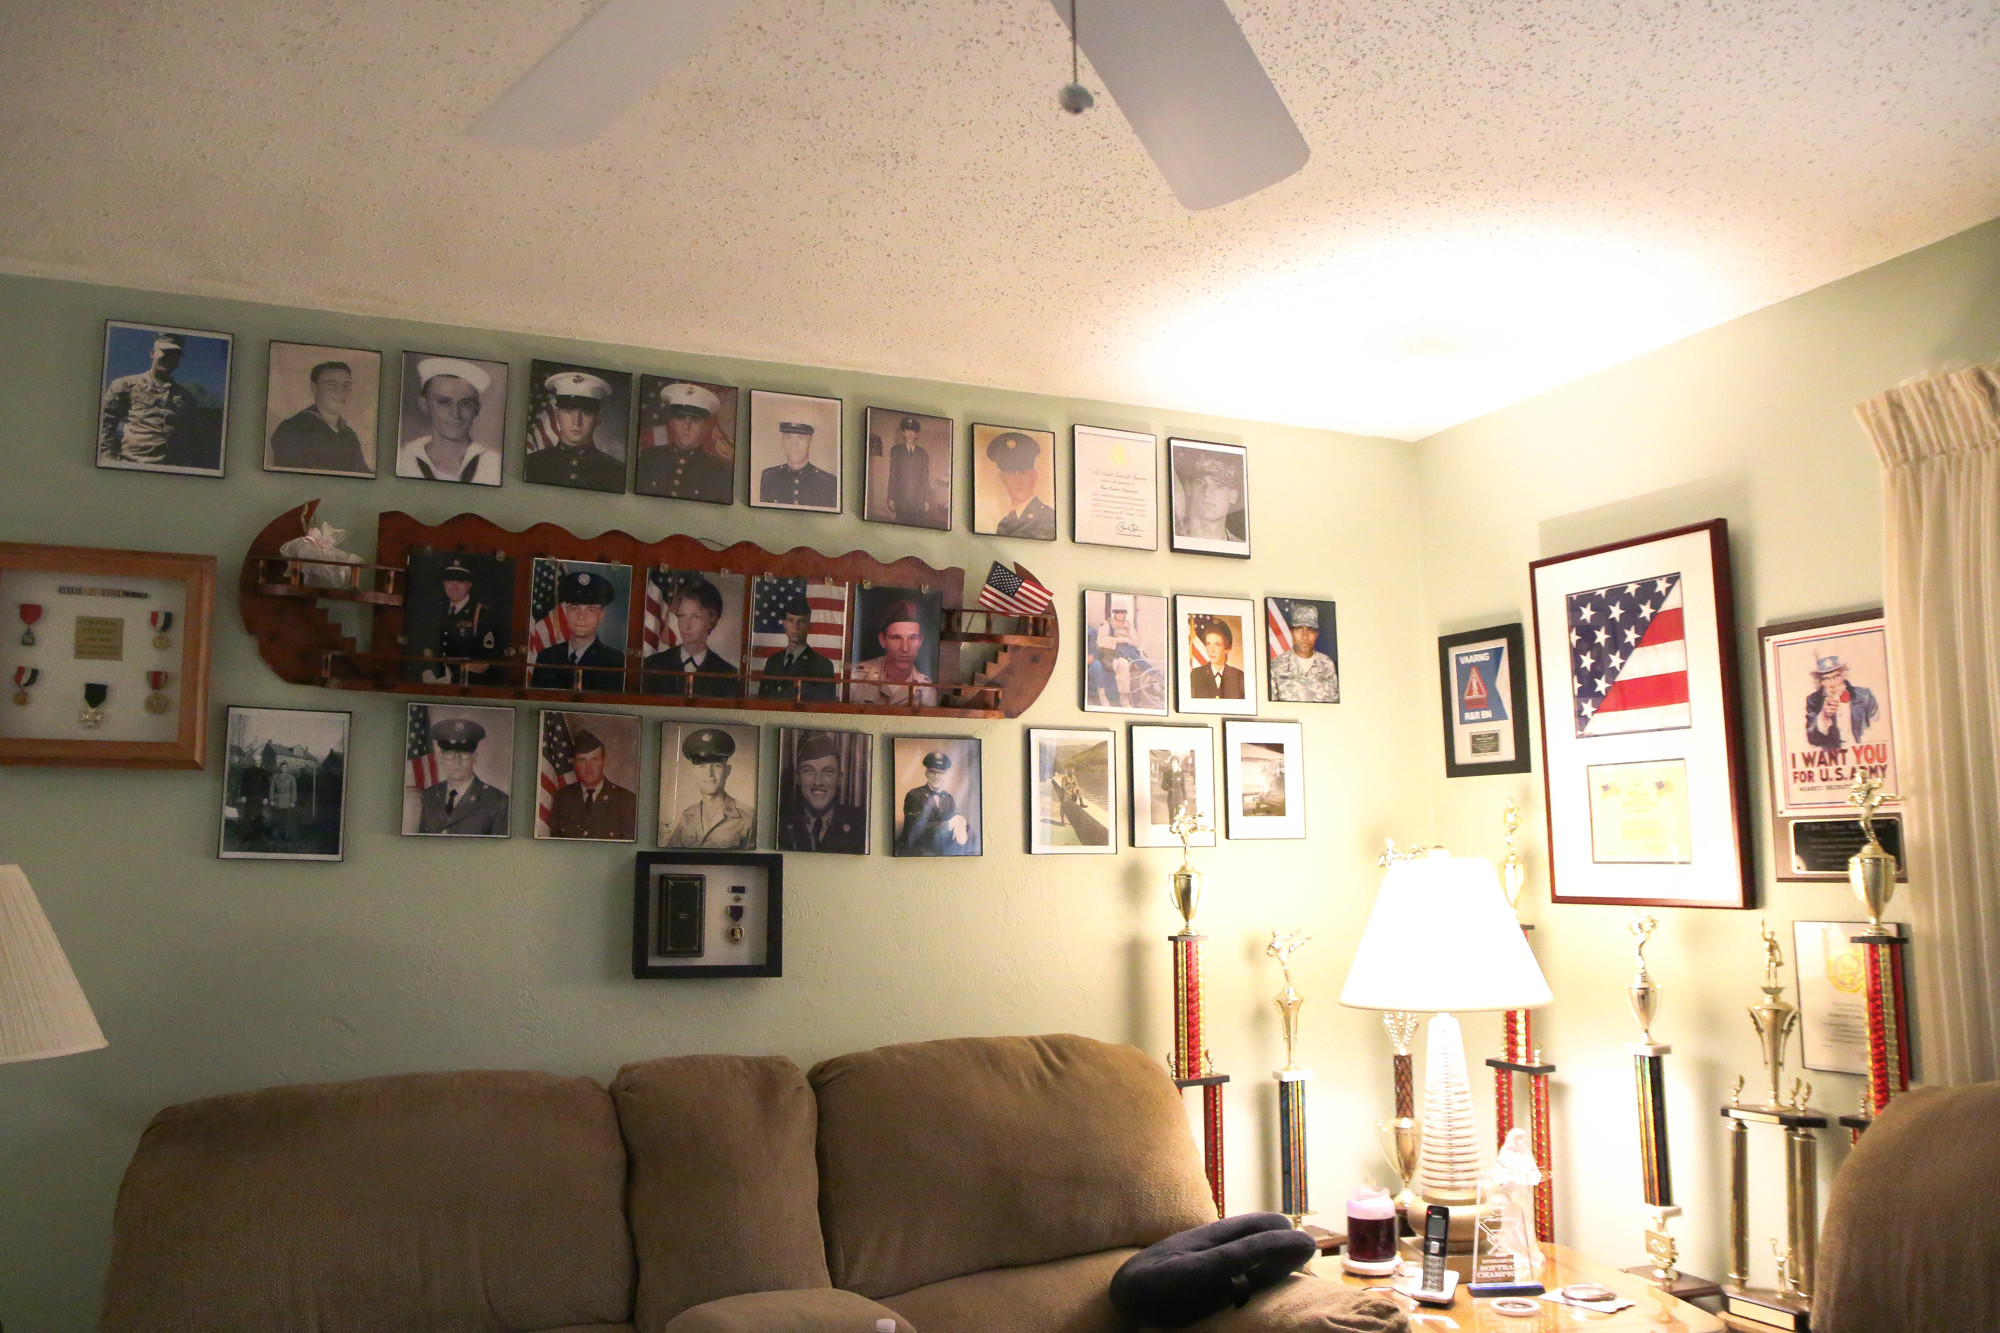 The Stewart's living room wall is filled with family members who are currently or were formerly in the U.S. Armed Forces. Photo by Paige Wilson